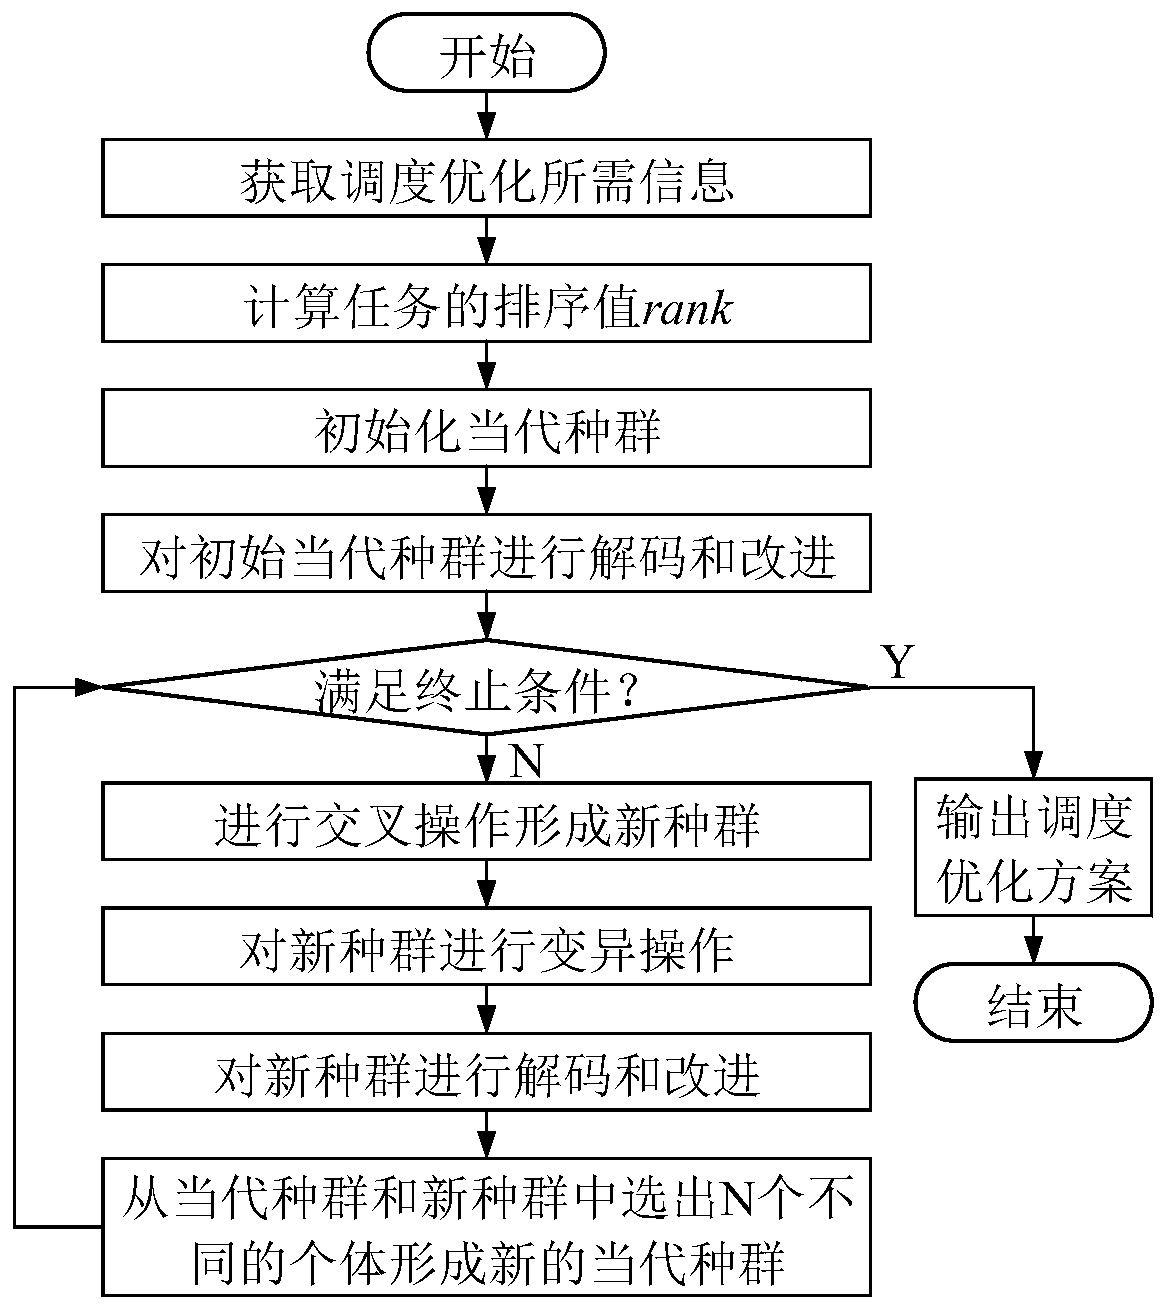 Cloud workflow scheduling optimization method using two-dimensional fixed-length coding intelligent computing algorithm